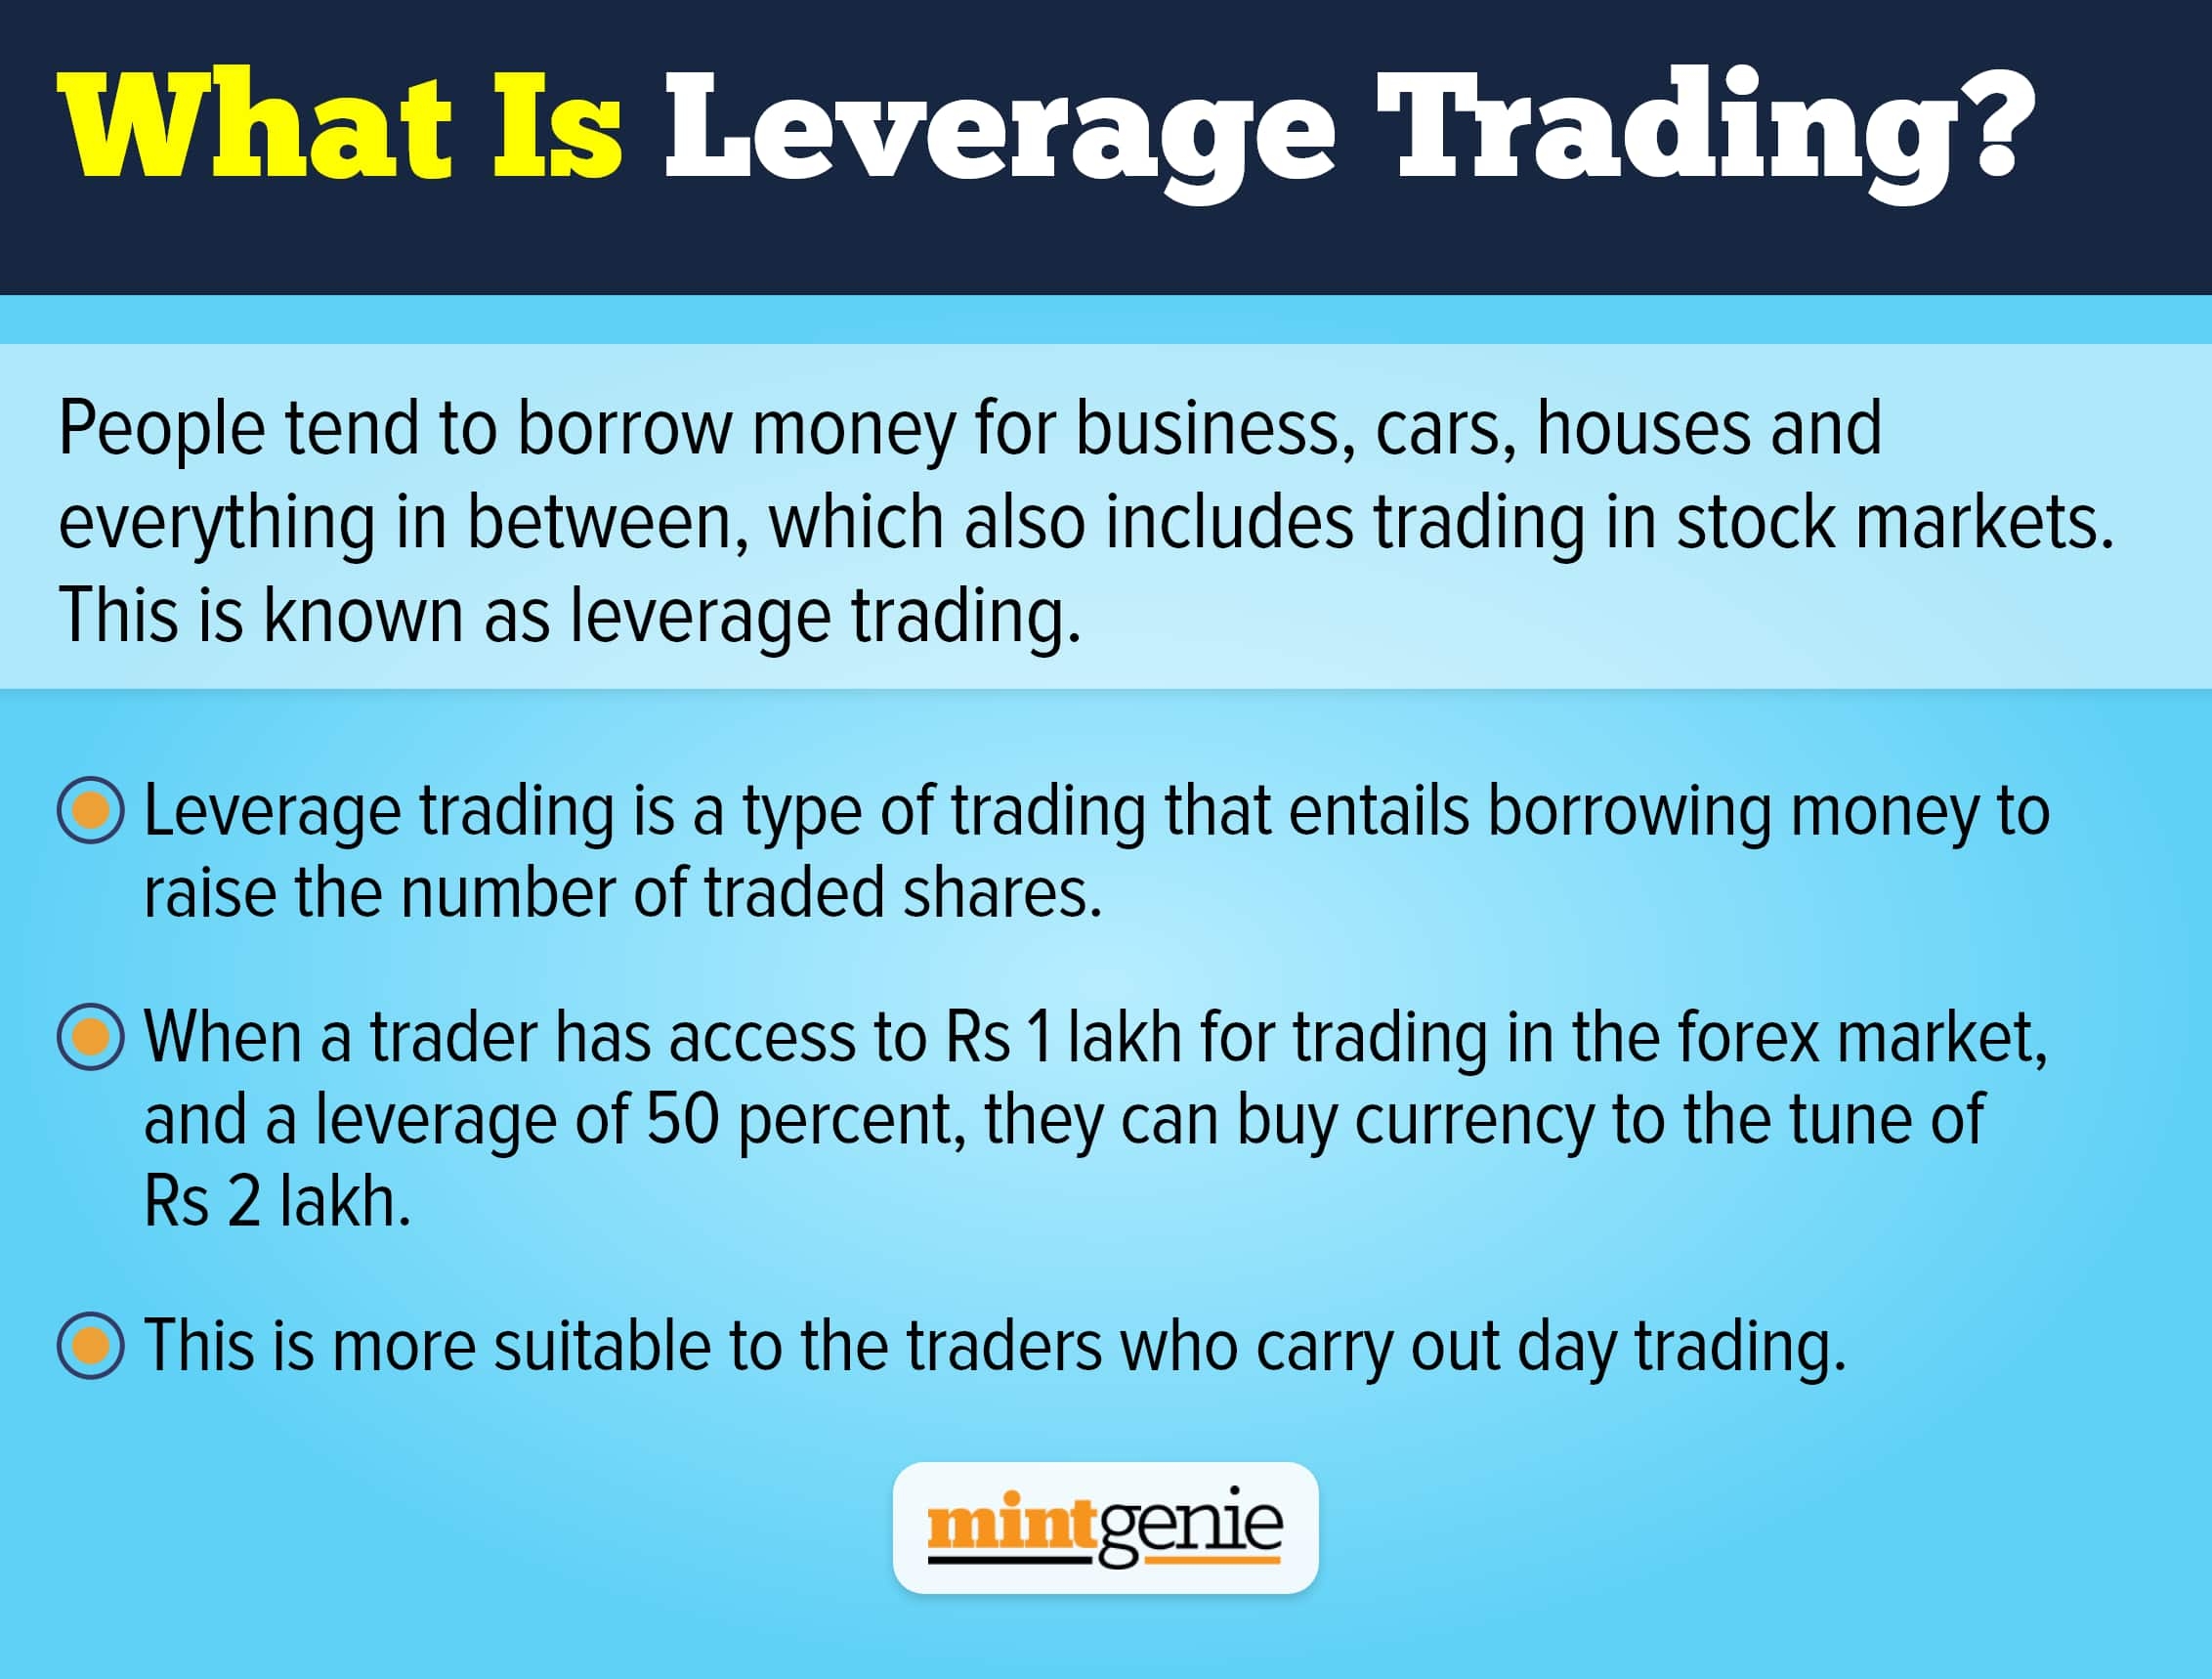 Leverage trading is a type of trading that entail borrowing money to raise the number of traded shares.&nbsp;